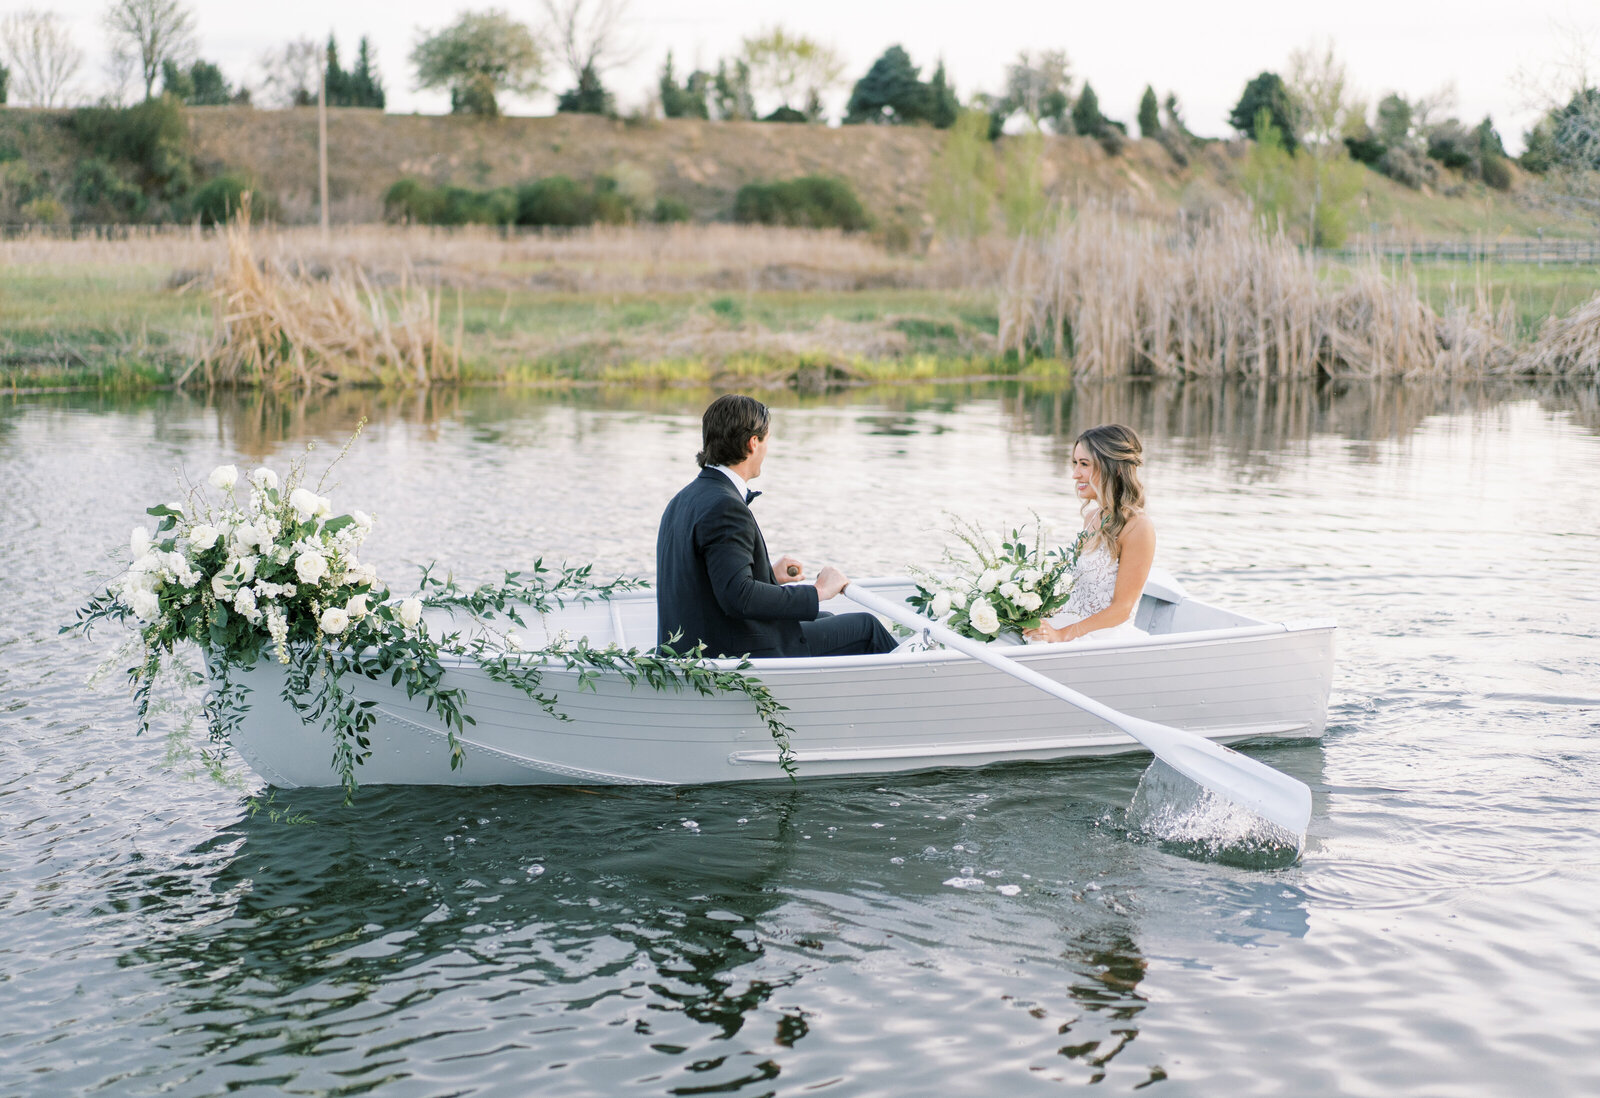 Portrait of a bride and groom in a white wedding gown and black tuxedo in a boat filled with flowers and greenery on a lake.